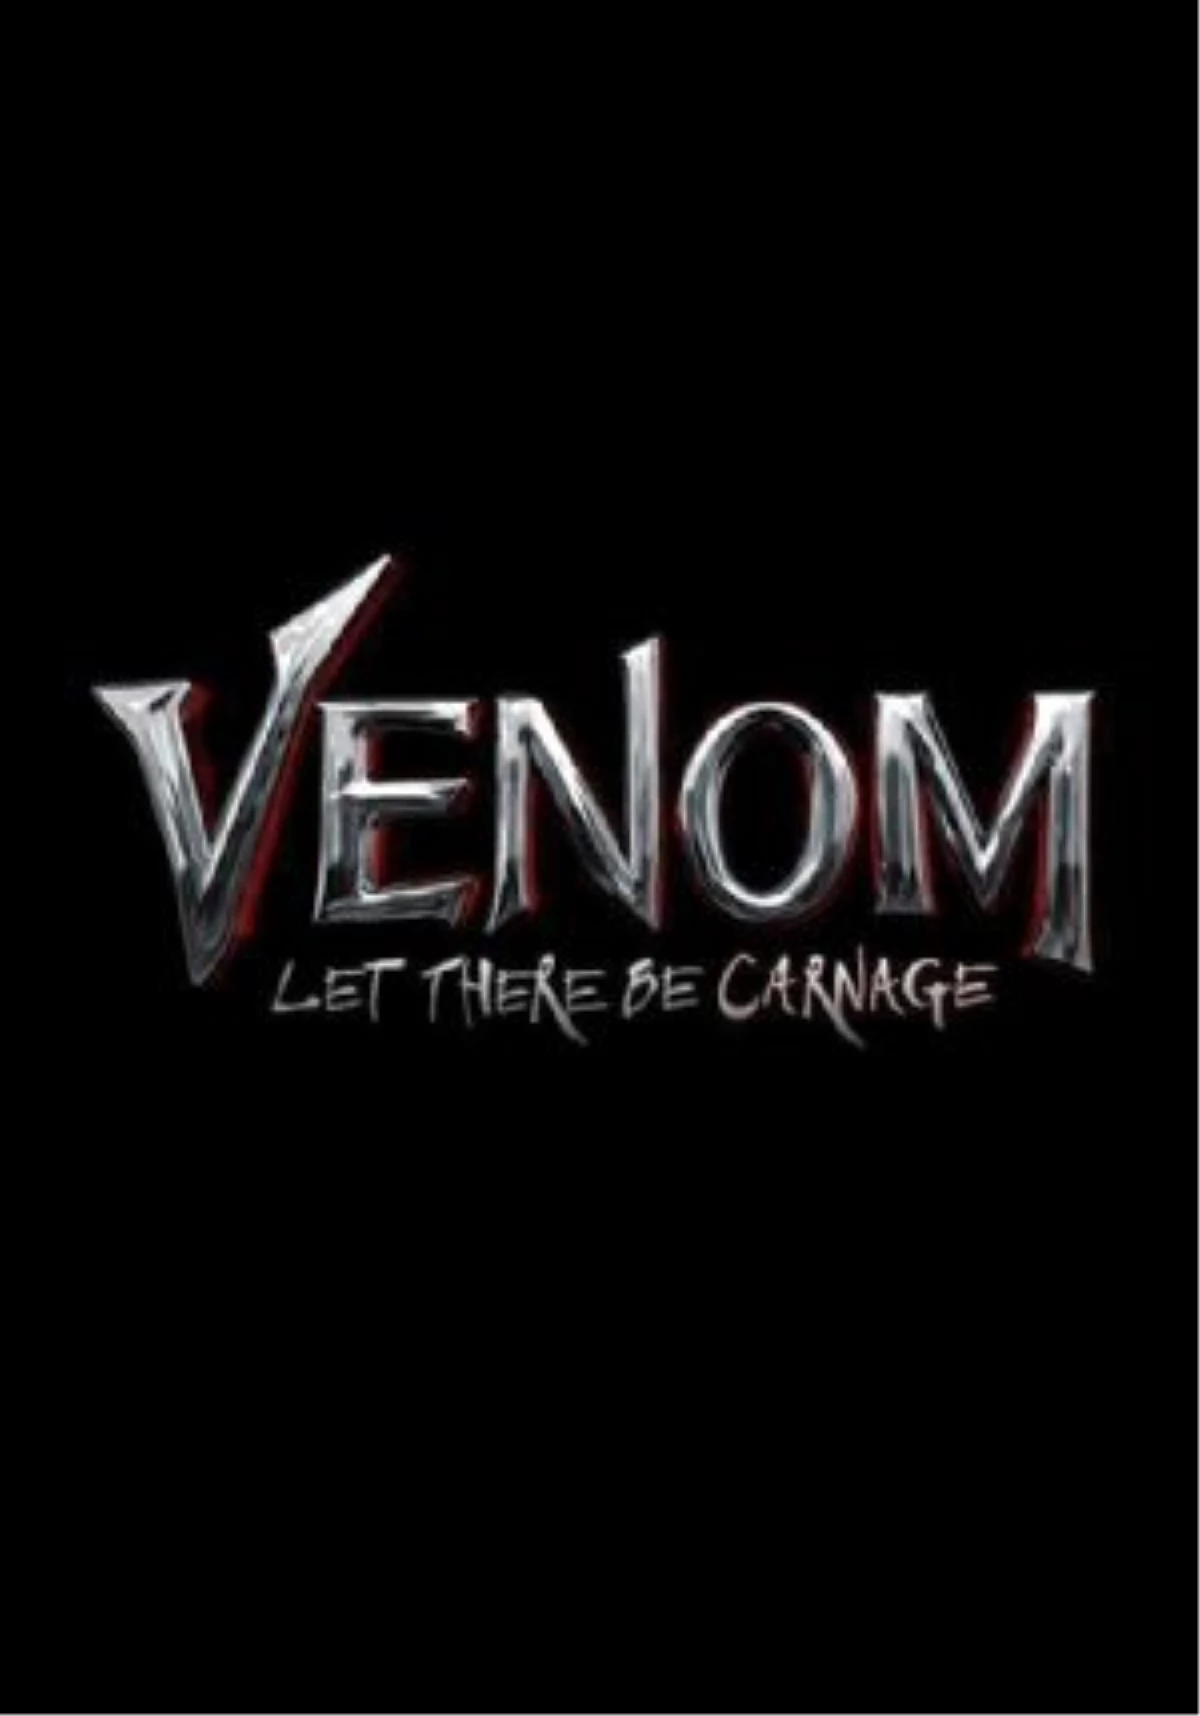 venom let there be carnage soap2day